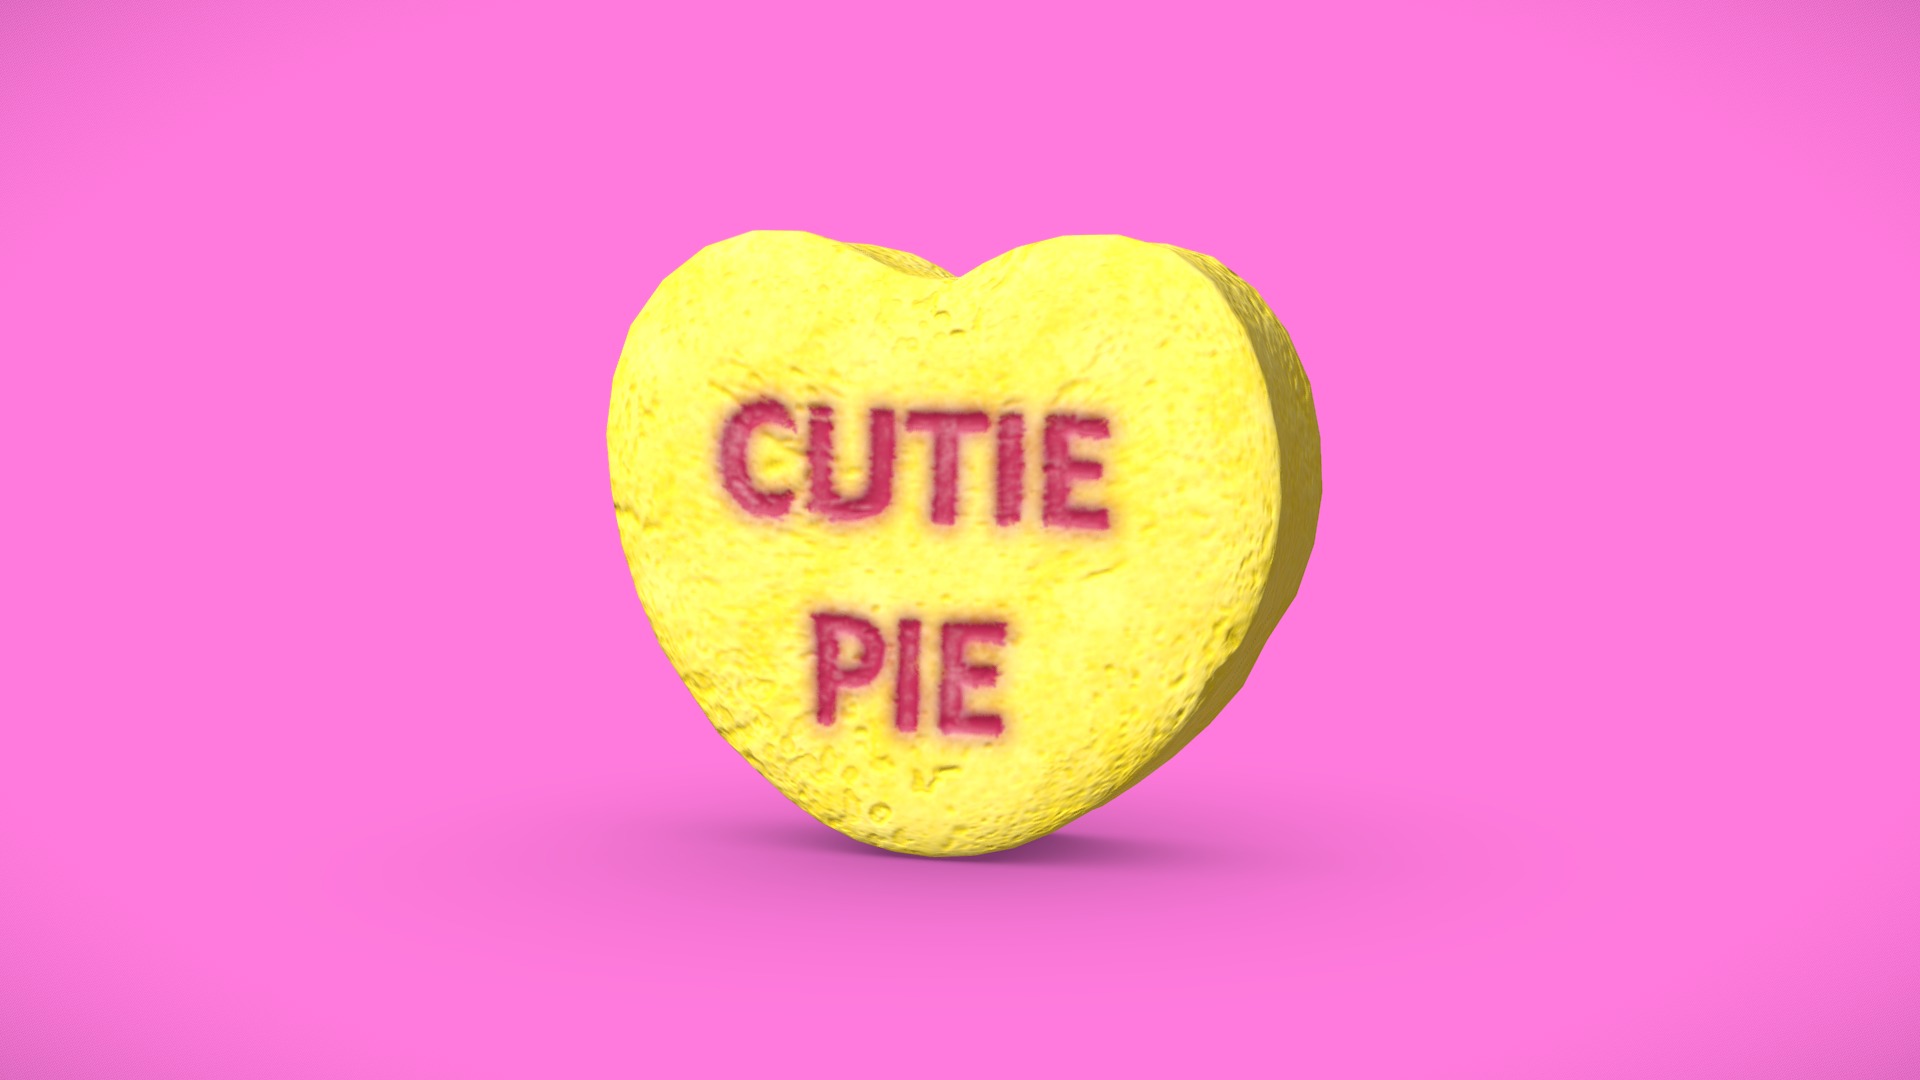 3D model Heart Candy – Cutie Pie - This is a 3D model of the Heart Candy - Cutie Pie. The 3D model is about a yellow lemon with a pink background.